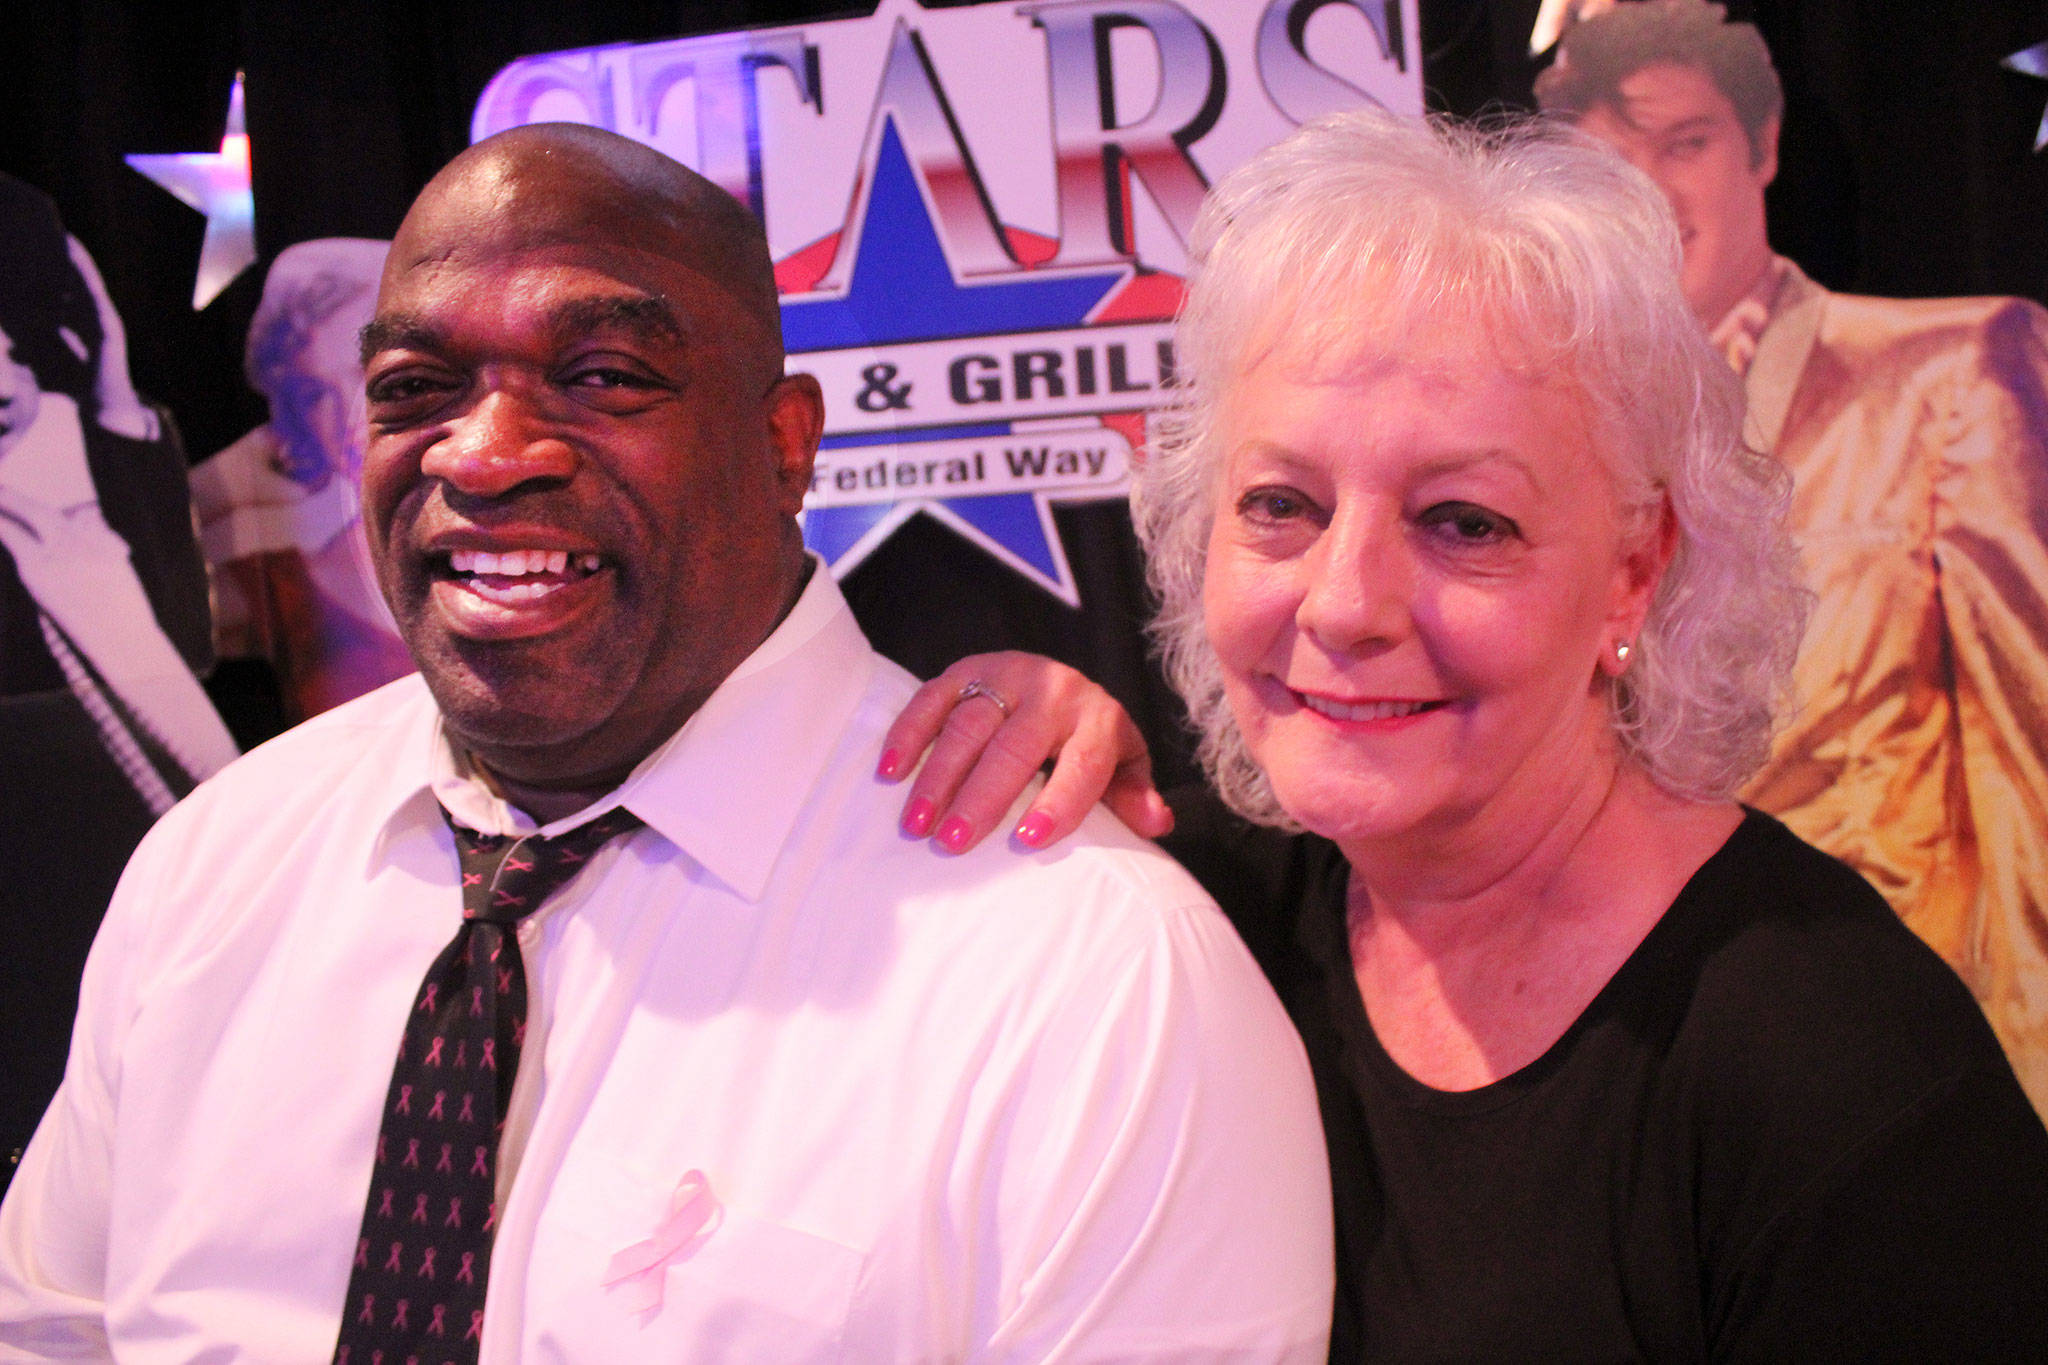 Cliff Satterwhite, pictured with Stars Bar and Grill owner Teena Nelson, recently completed a 36-hour karaoke marathon singing the Garth Brooks song “Friends in Low Places.” (Photo by Andy Hobbs, the Mirror)